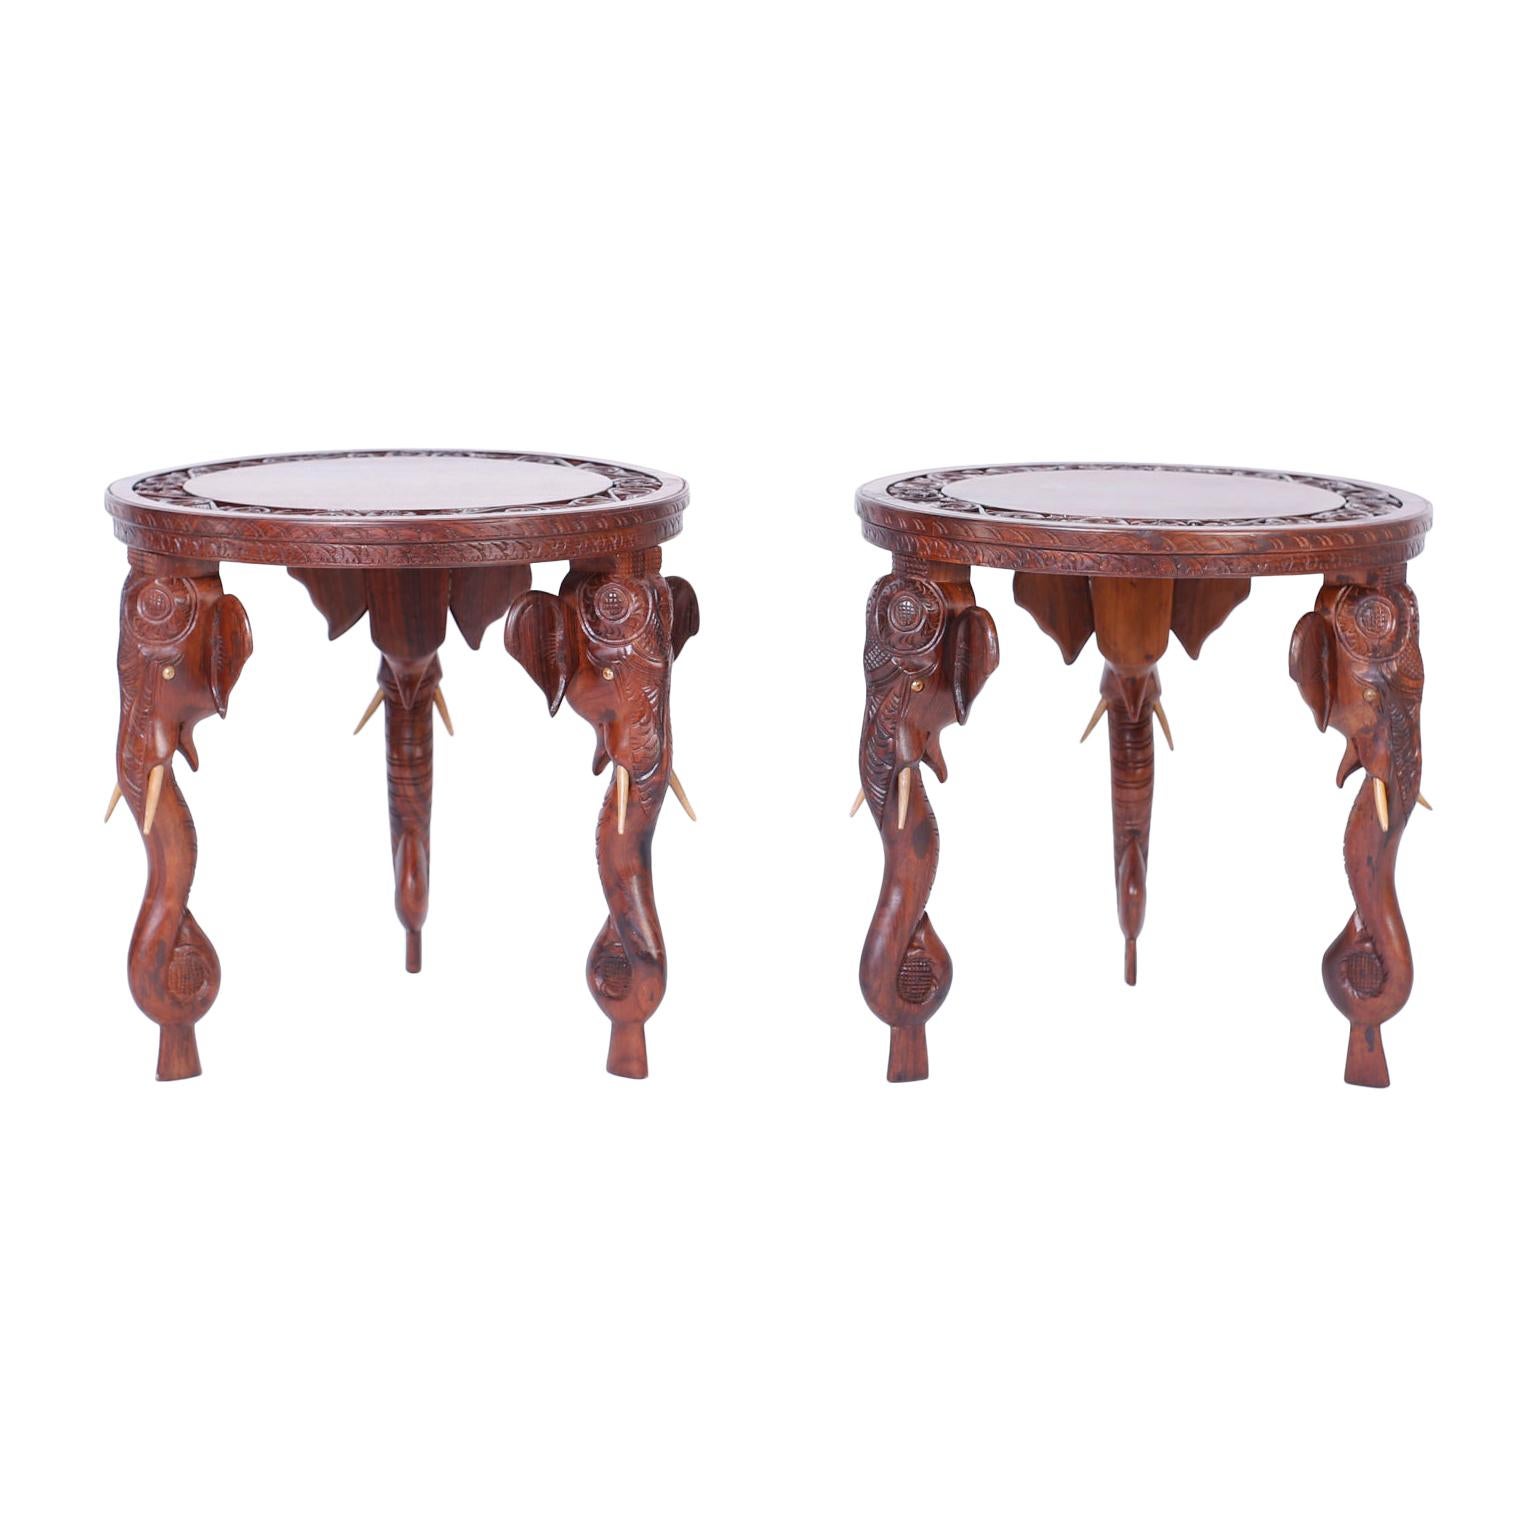 Pair of Anglo-Indian Rosewood Tables or Stands For Sale